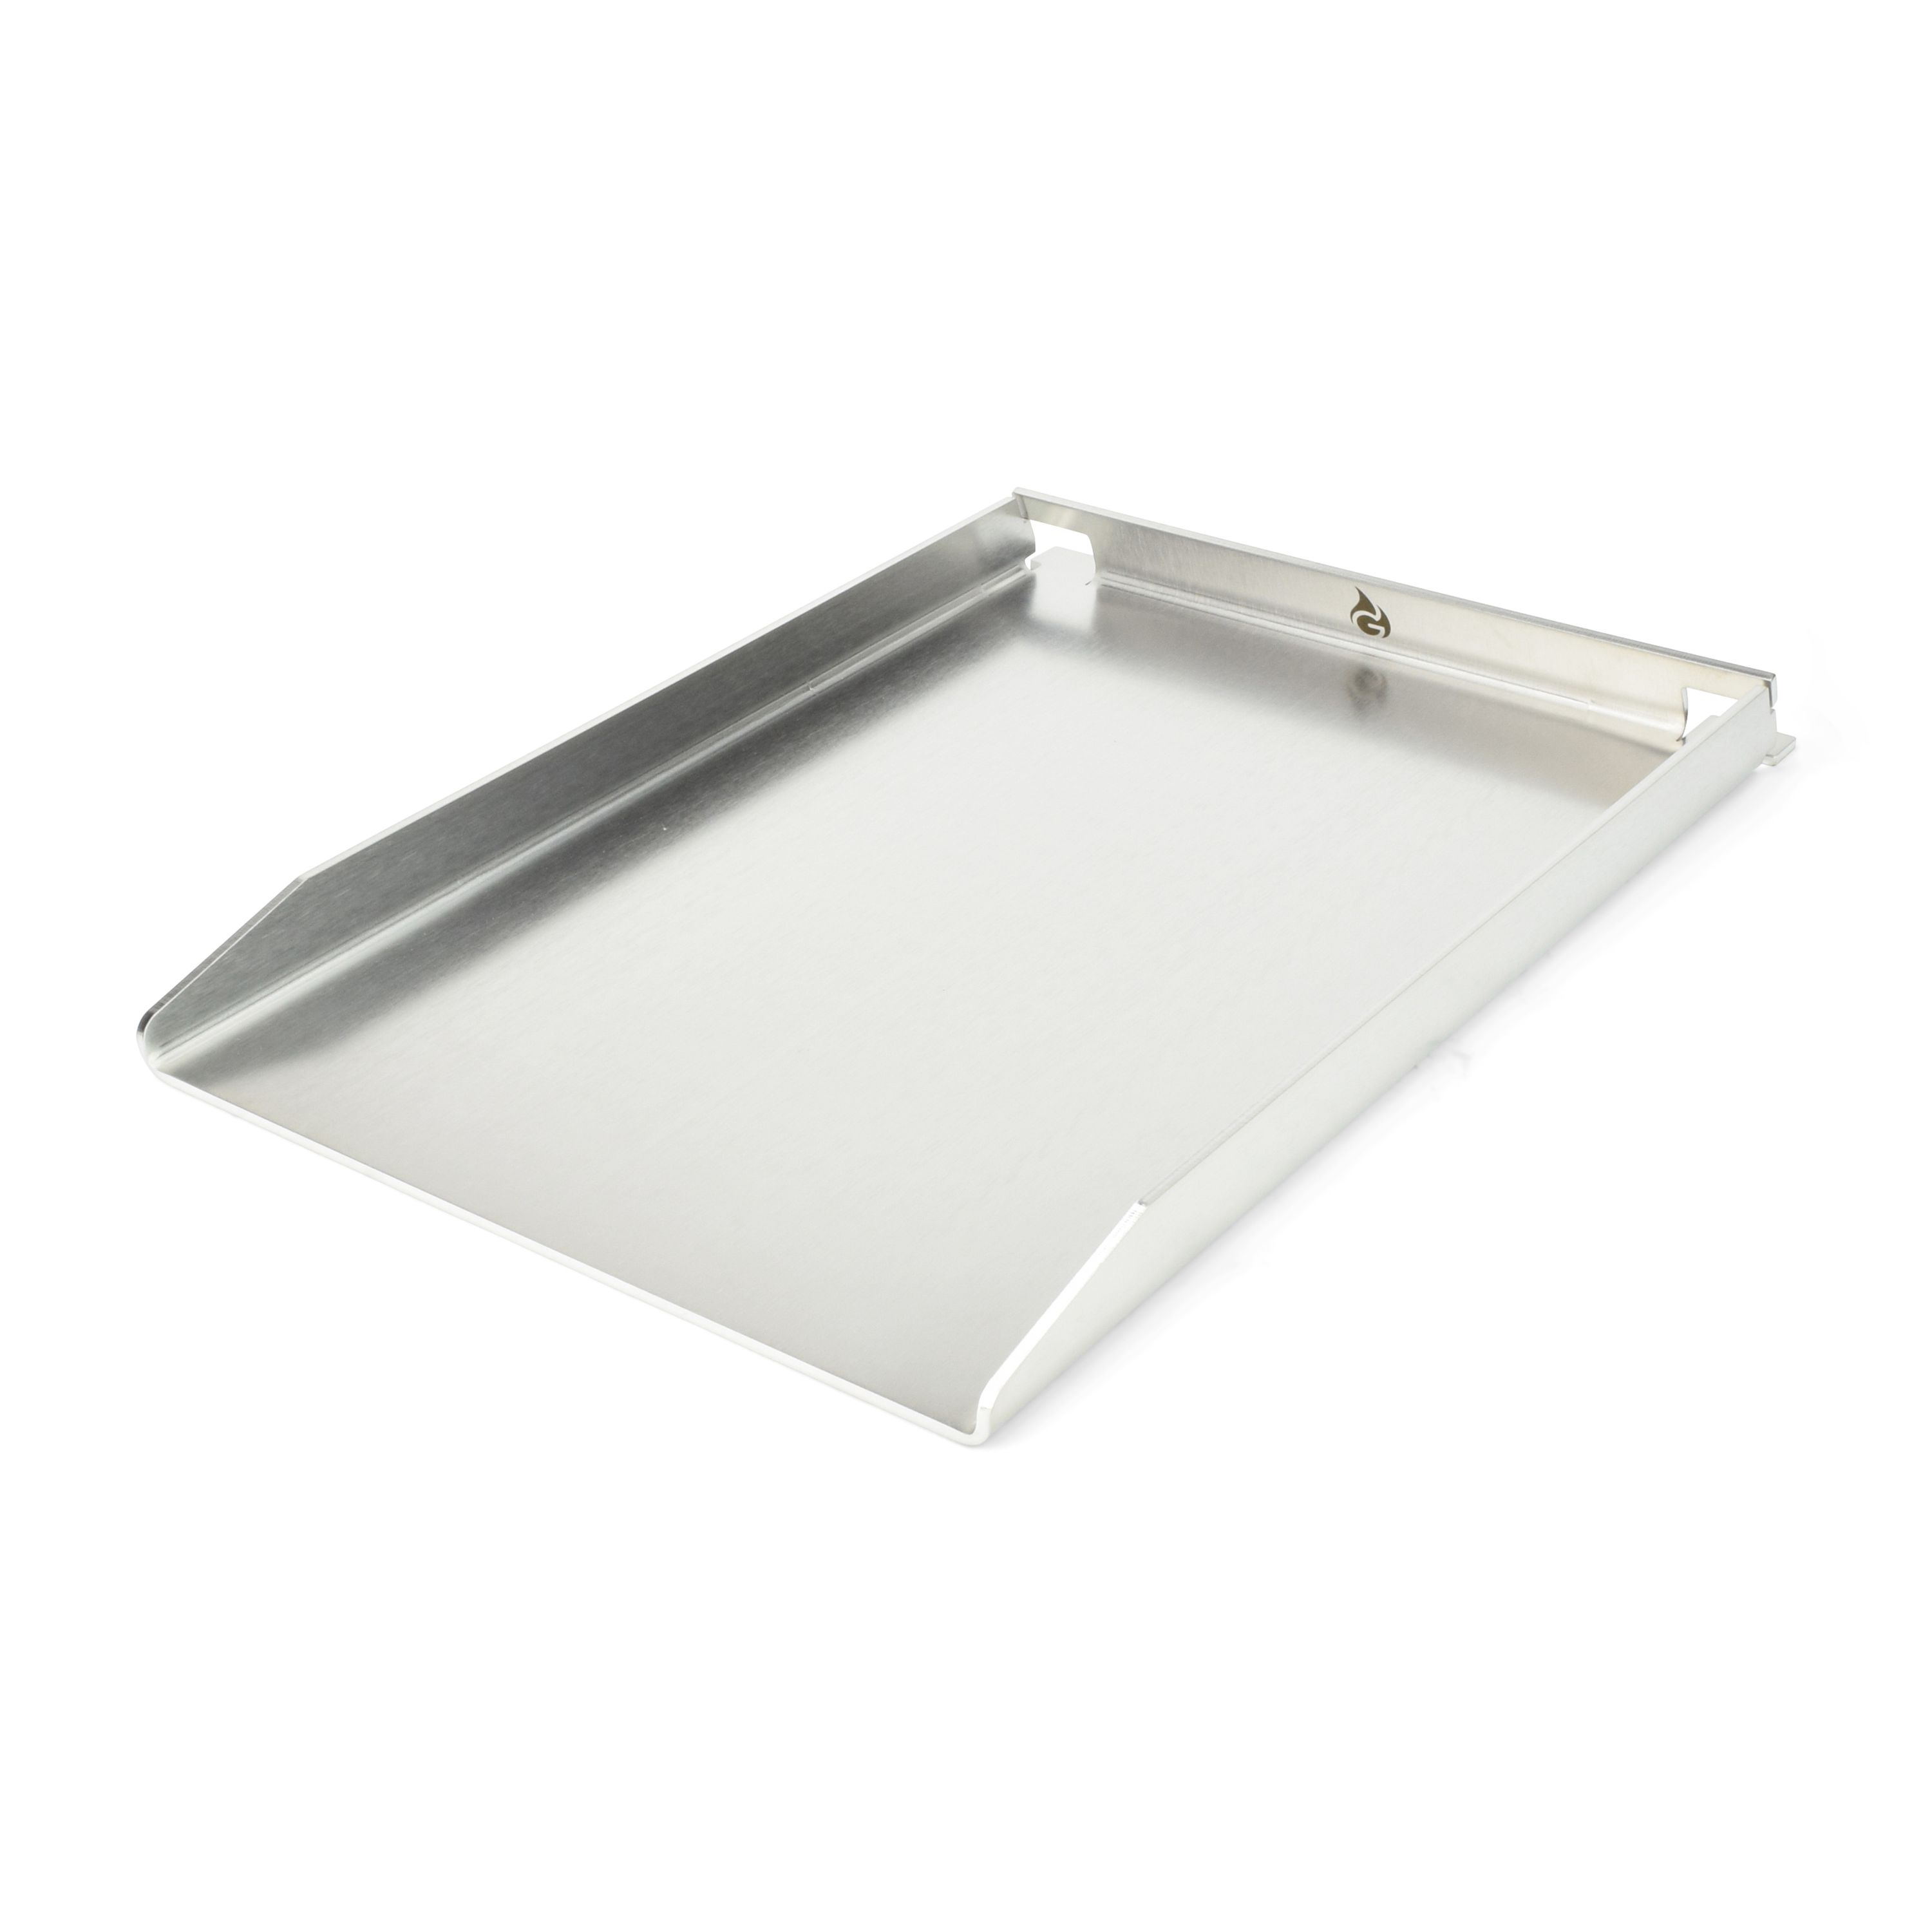 Stainless Steel Grill Plate - Plancha 45 x 30cm